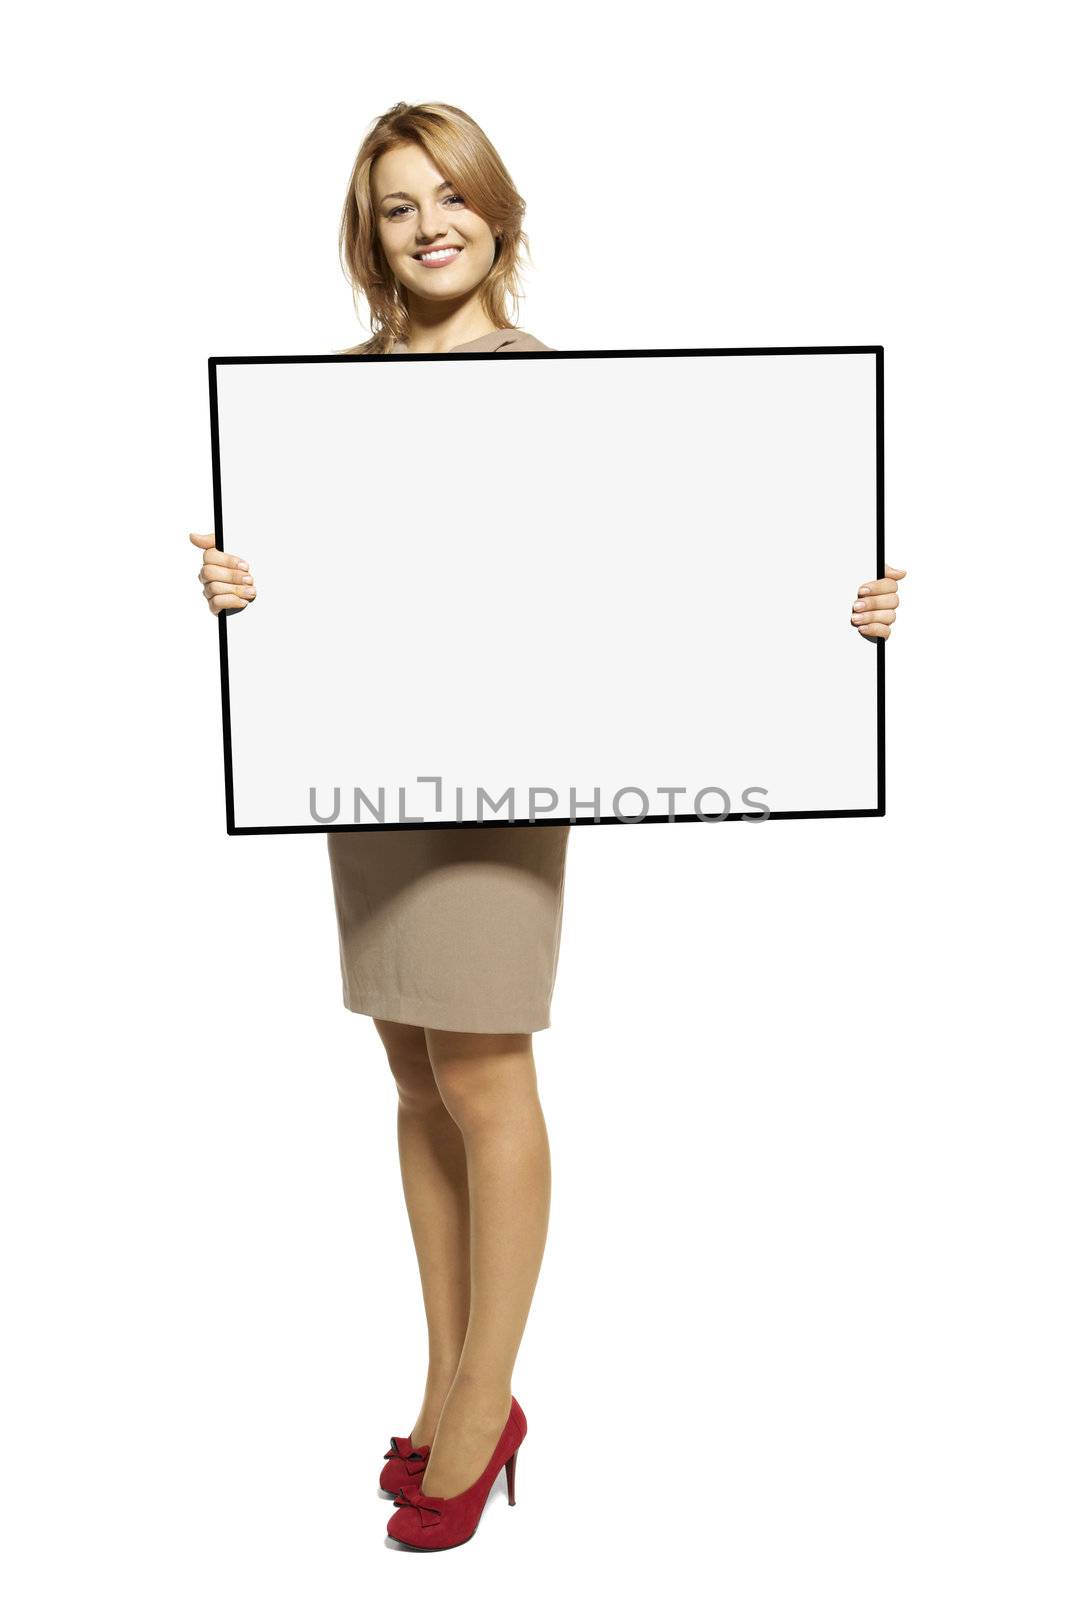 Attractive Woman Holding Up a Blank Sign by filipw